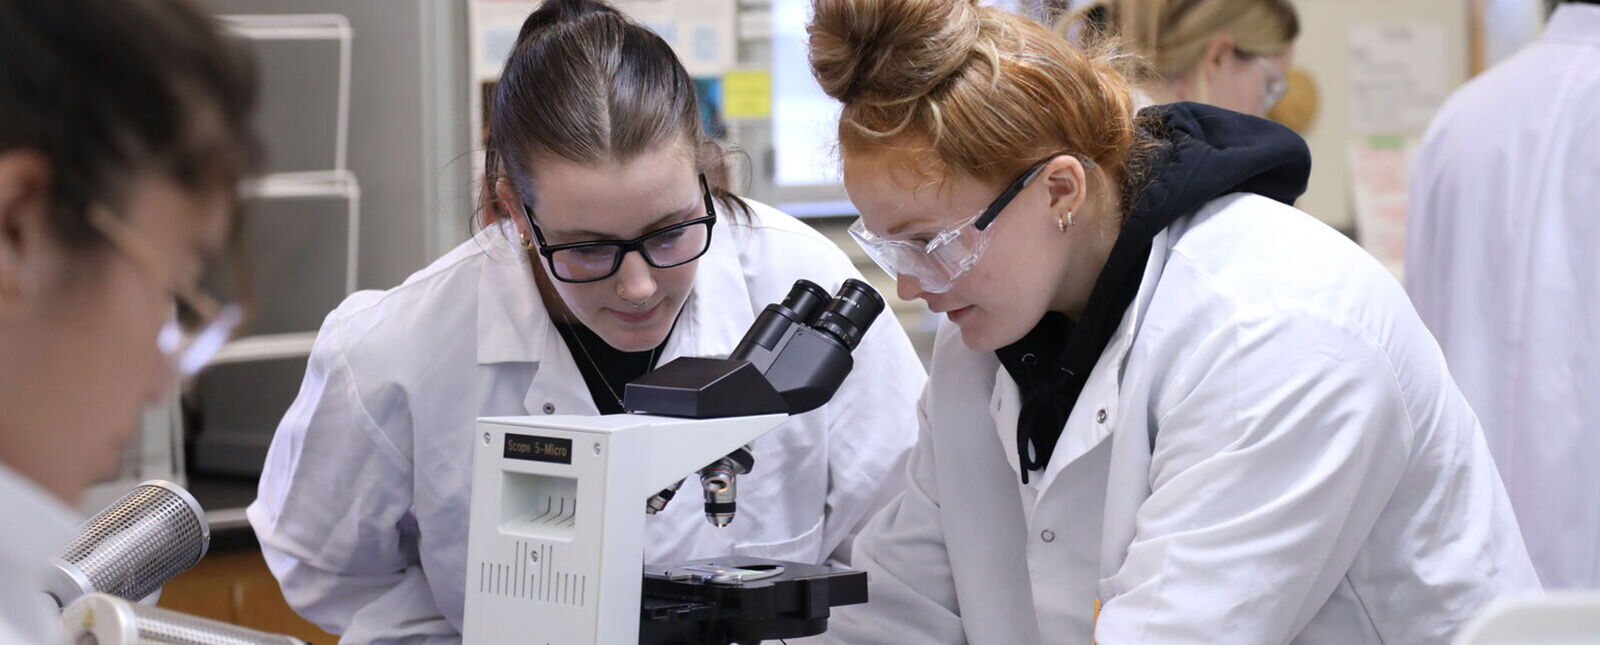 Two female students work around a microscope in a lab